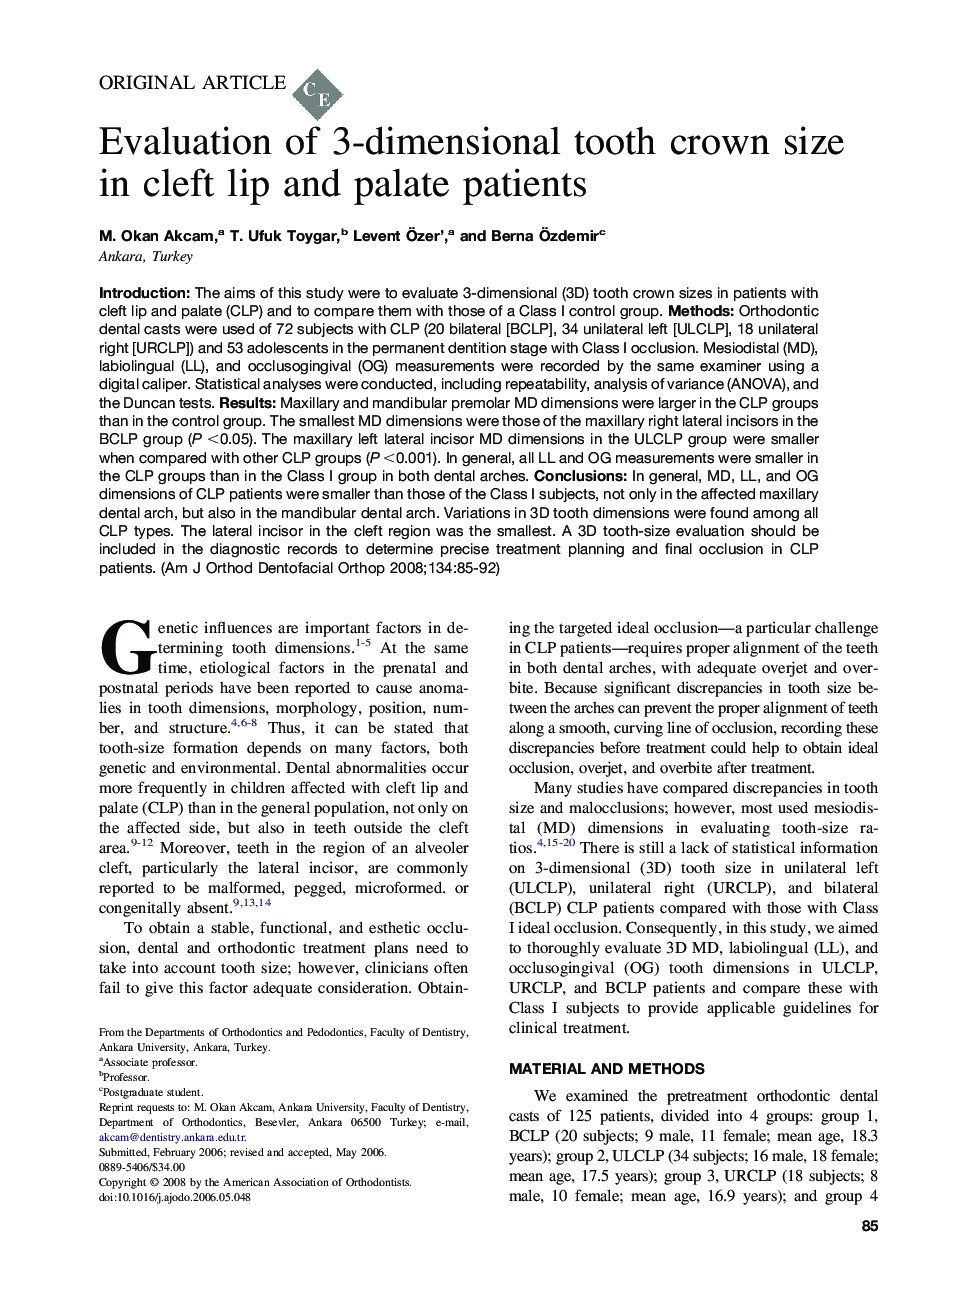 Evaluation of 3-dimensional tooth crown size in cleft lip and palate patients